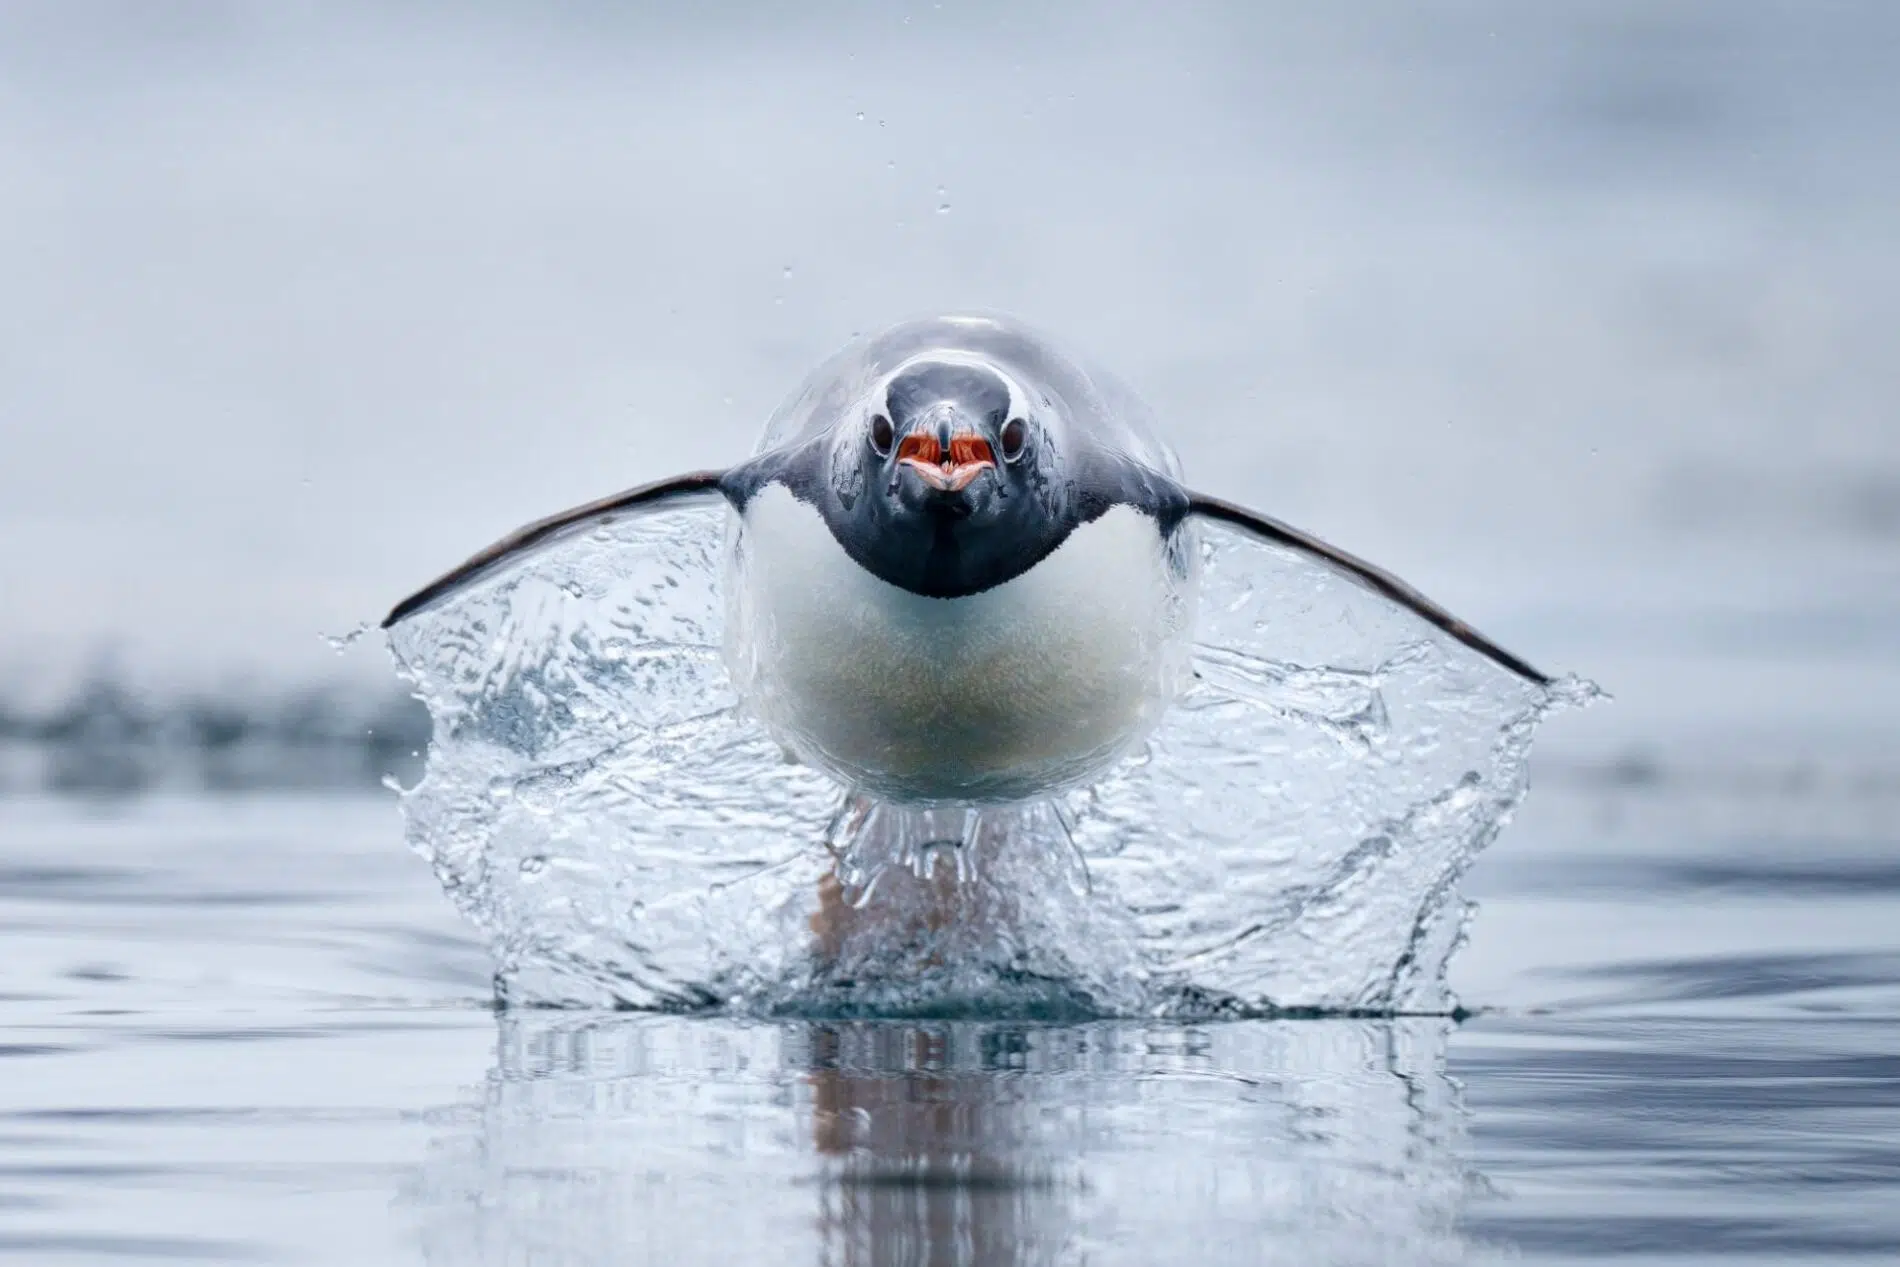 Craig Parry, a gentoo penguin, the fastest penguin species in the world, charges across the water, Antarctica